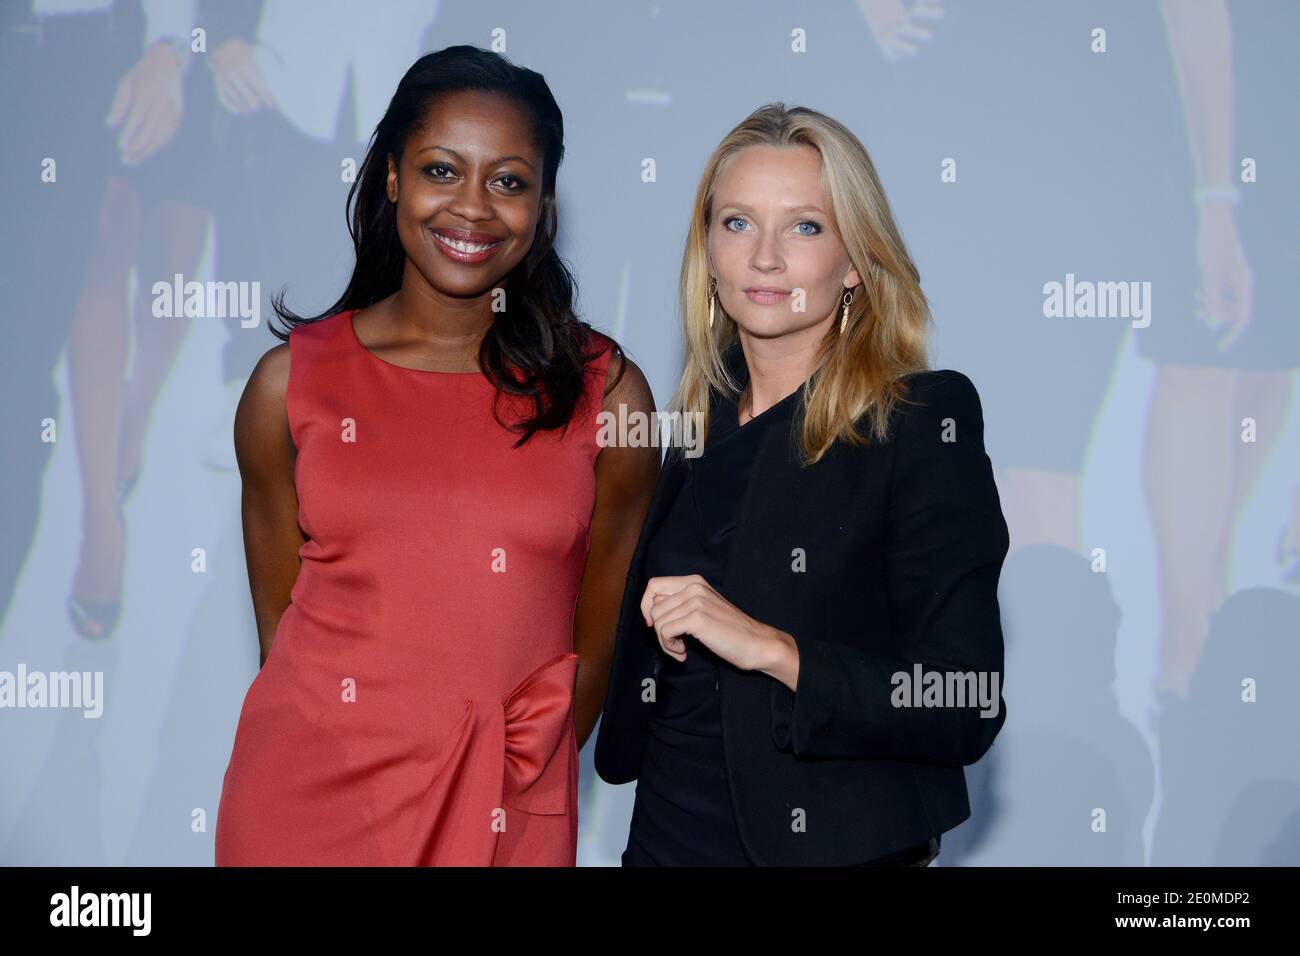 Ele Asu and Adrienne de Mallerey attending the press conference of D8 and D17 Group Canal Plus TV Presentation at Le Carrousel du Louvre in Paris, France on September 20, 2012. Photo by Nicolas Briquet/ABACAPRESS.COM Stock Photo